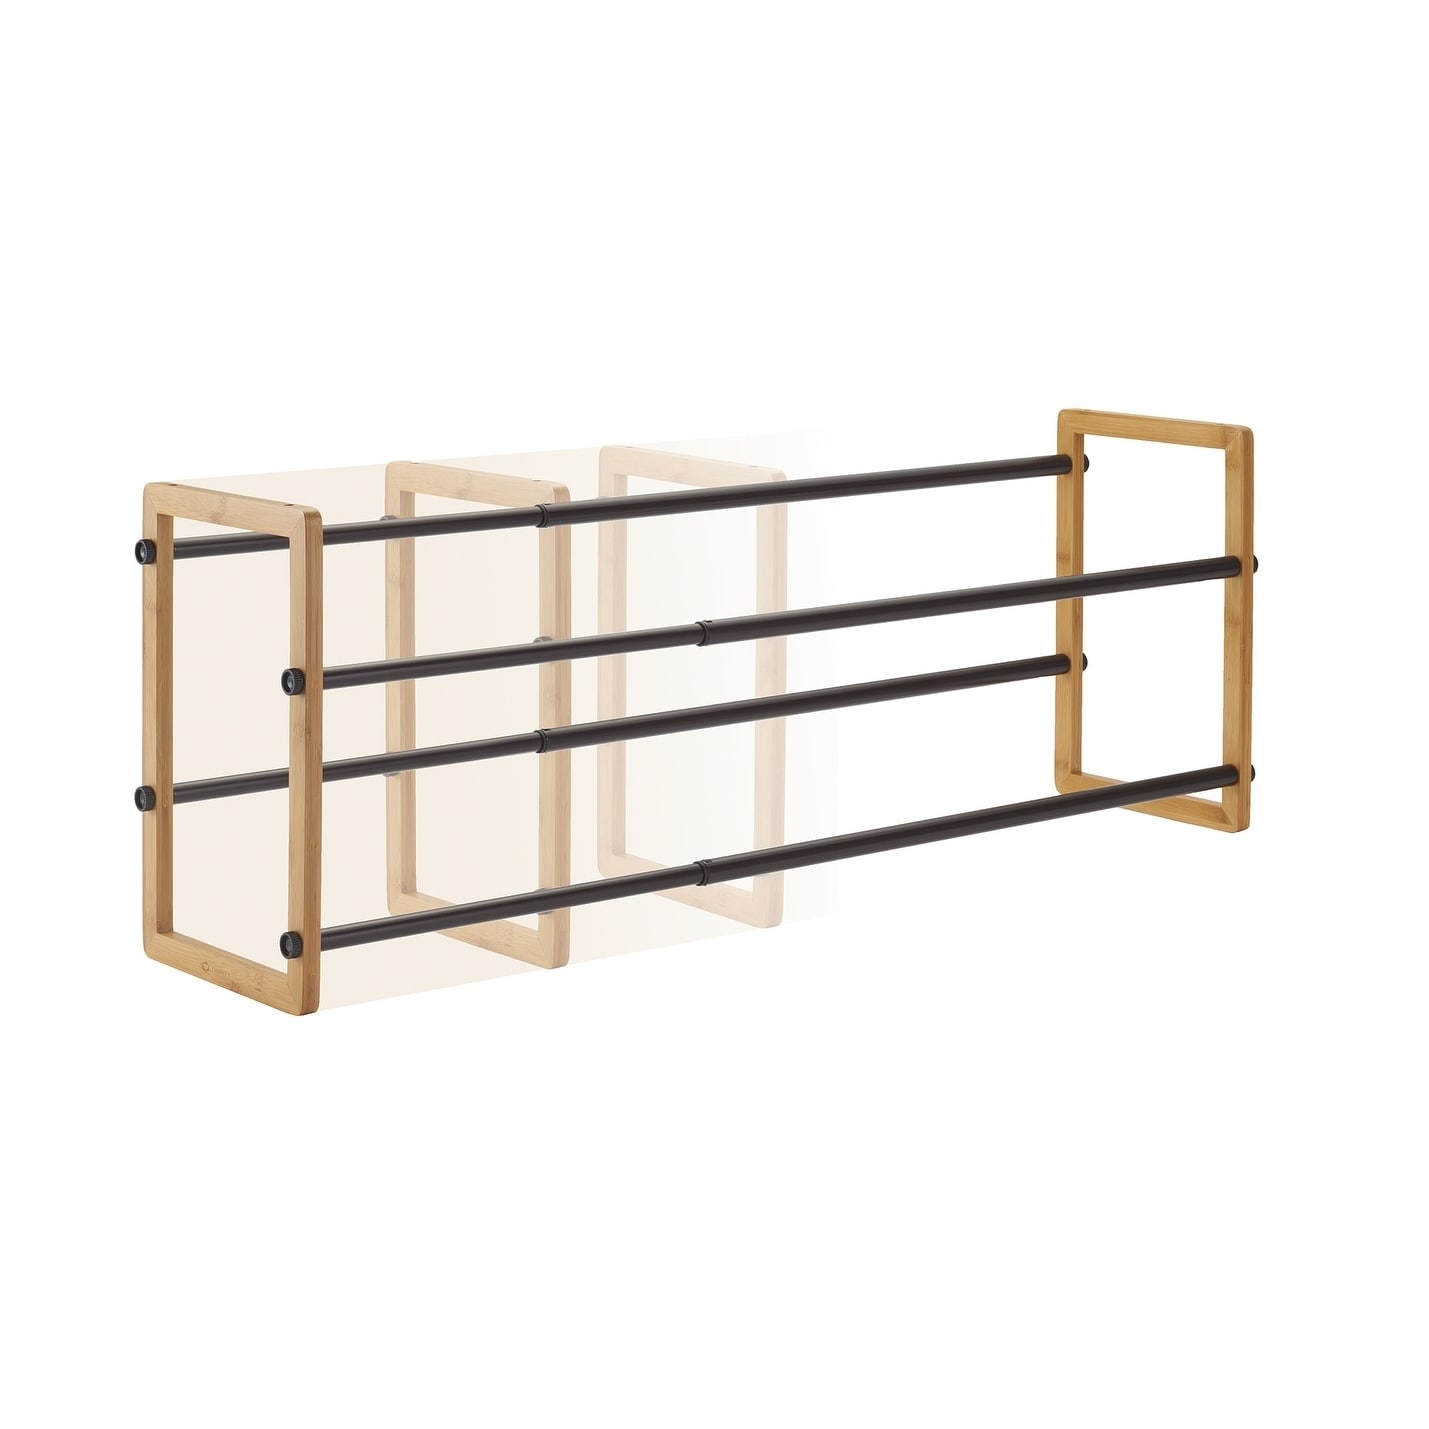 Shop Black Friday Deals On Trinity Basics 2 Tier 24 44 Expandable Shoe Rack Bamboo 2 Pack Overstock 22884553